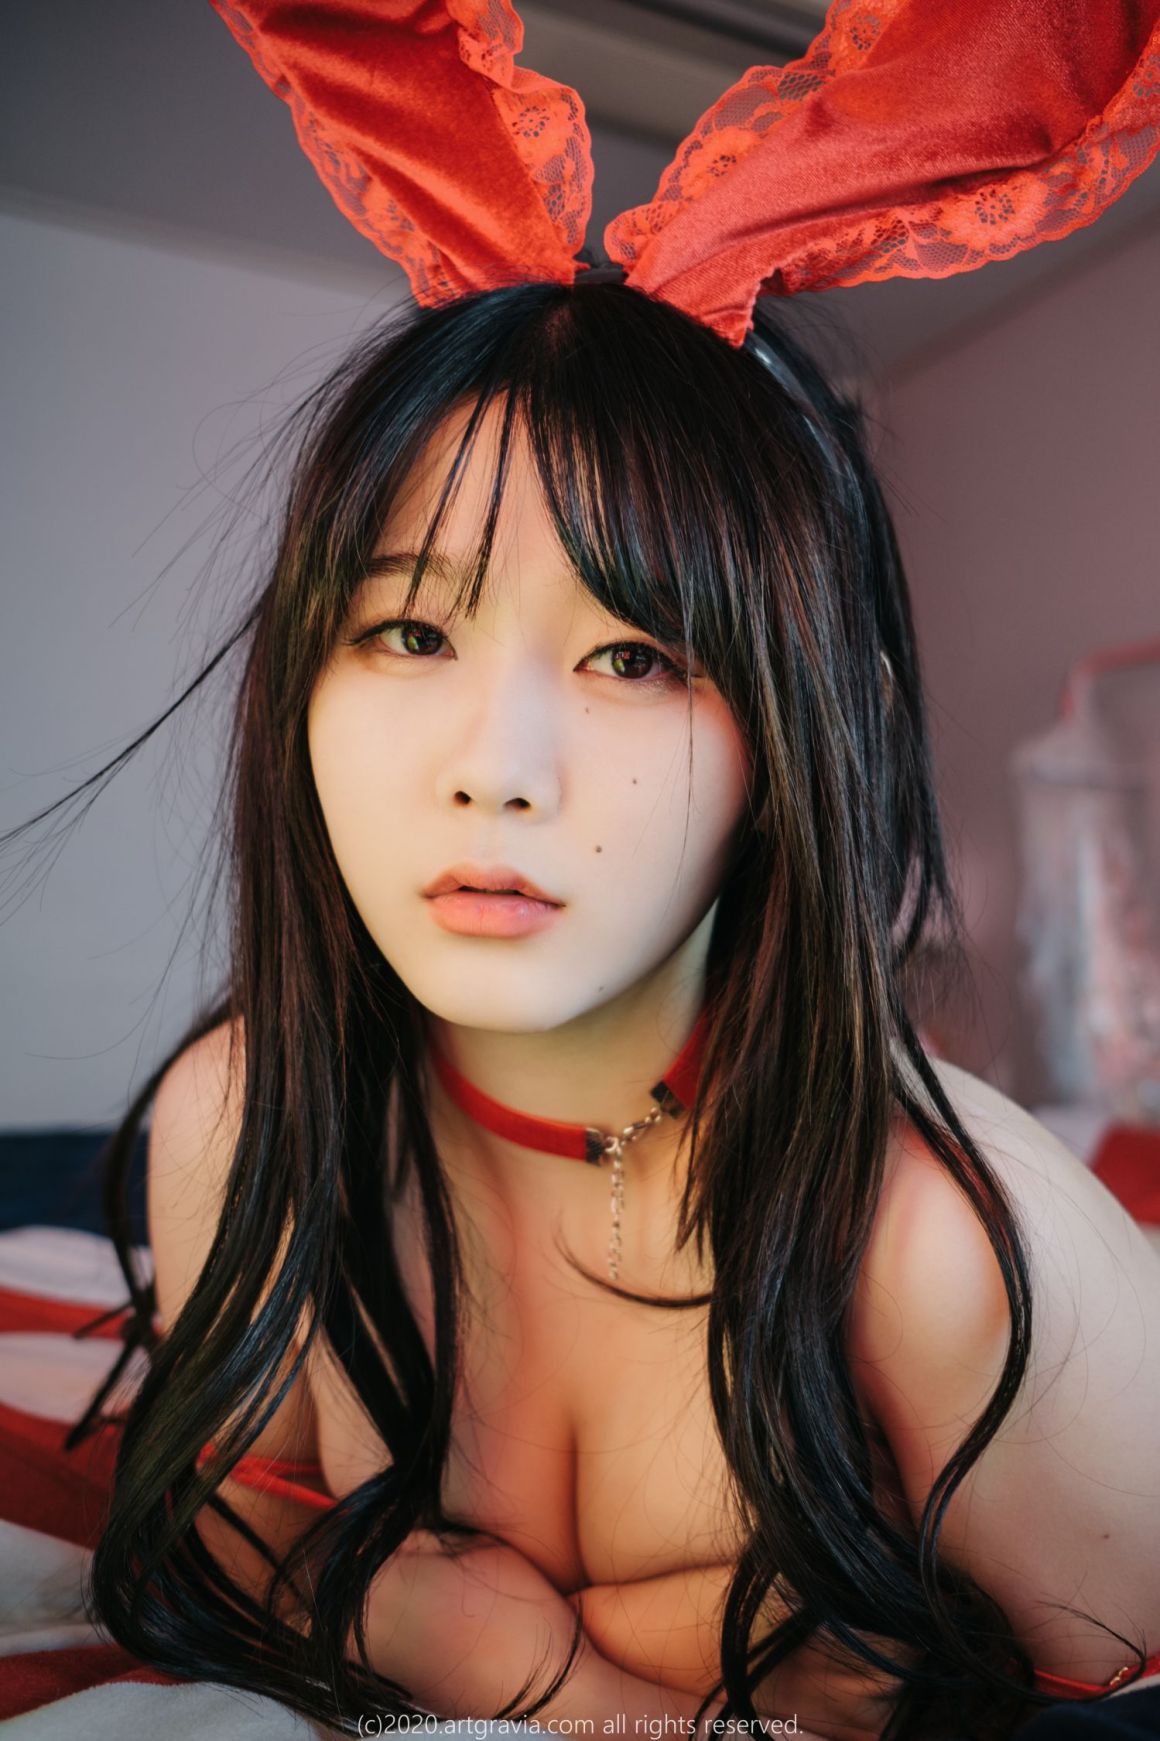 AsianOnlyfans.com 34 353 20211009